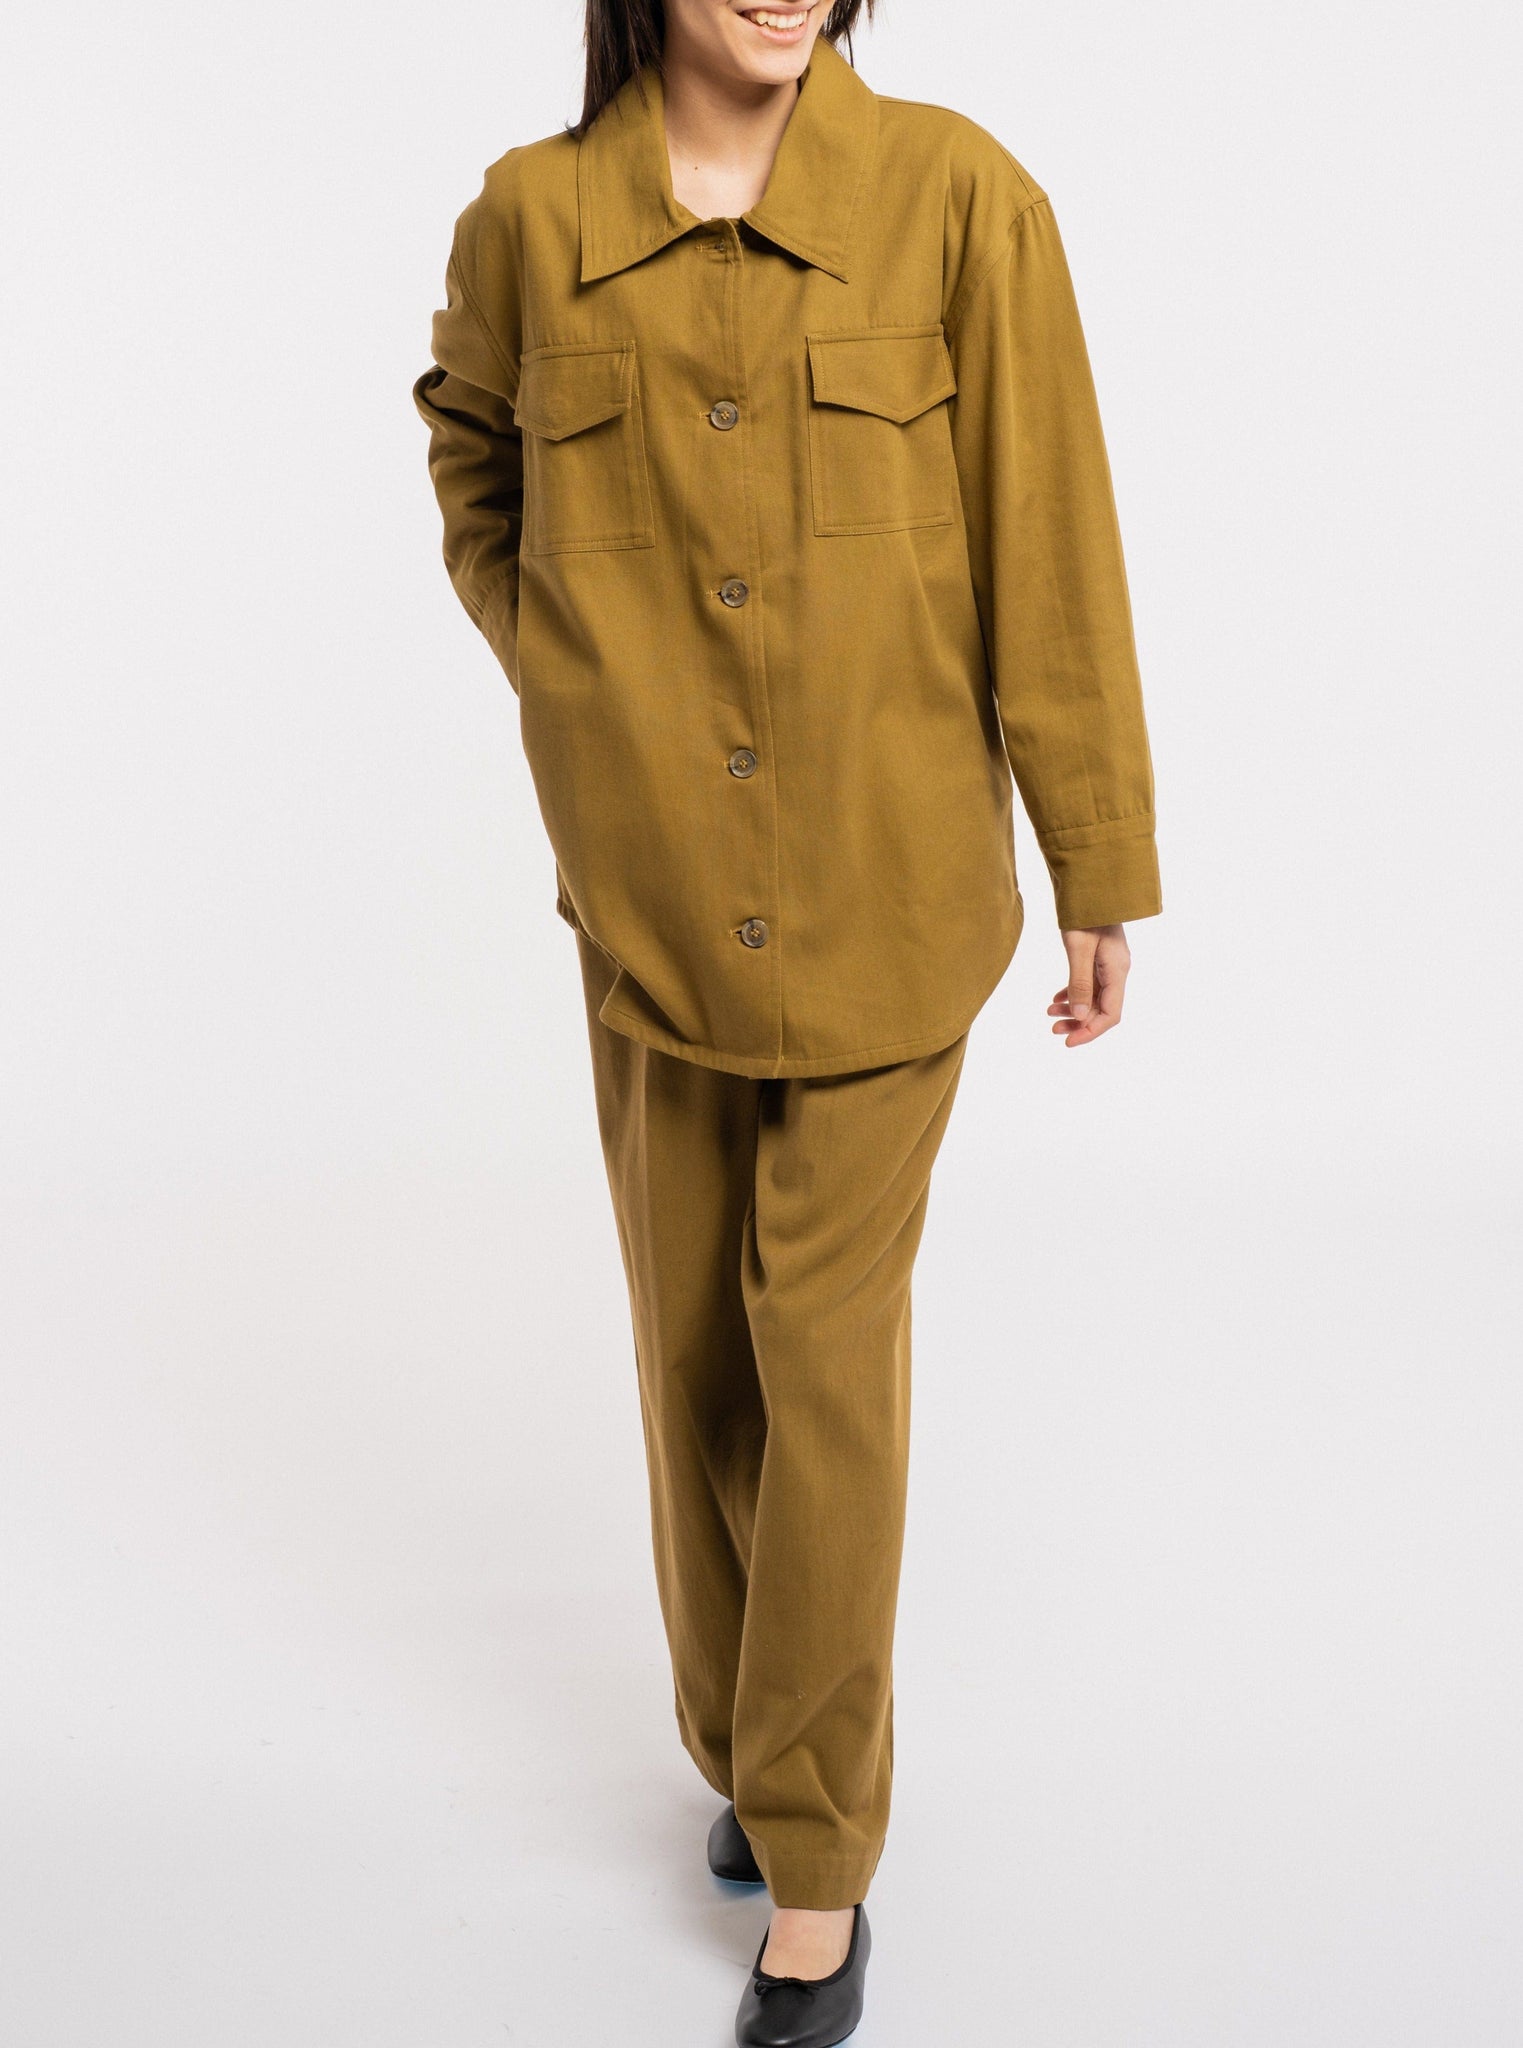 A woman wearing a Roan Shirt Jacket - Olive.